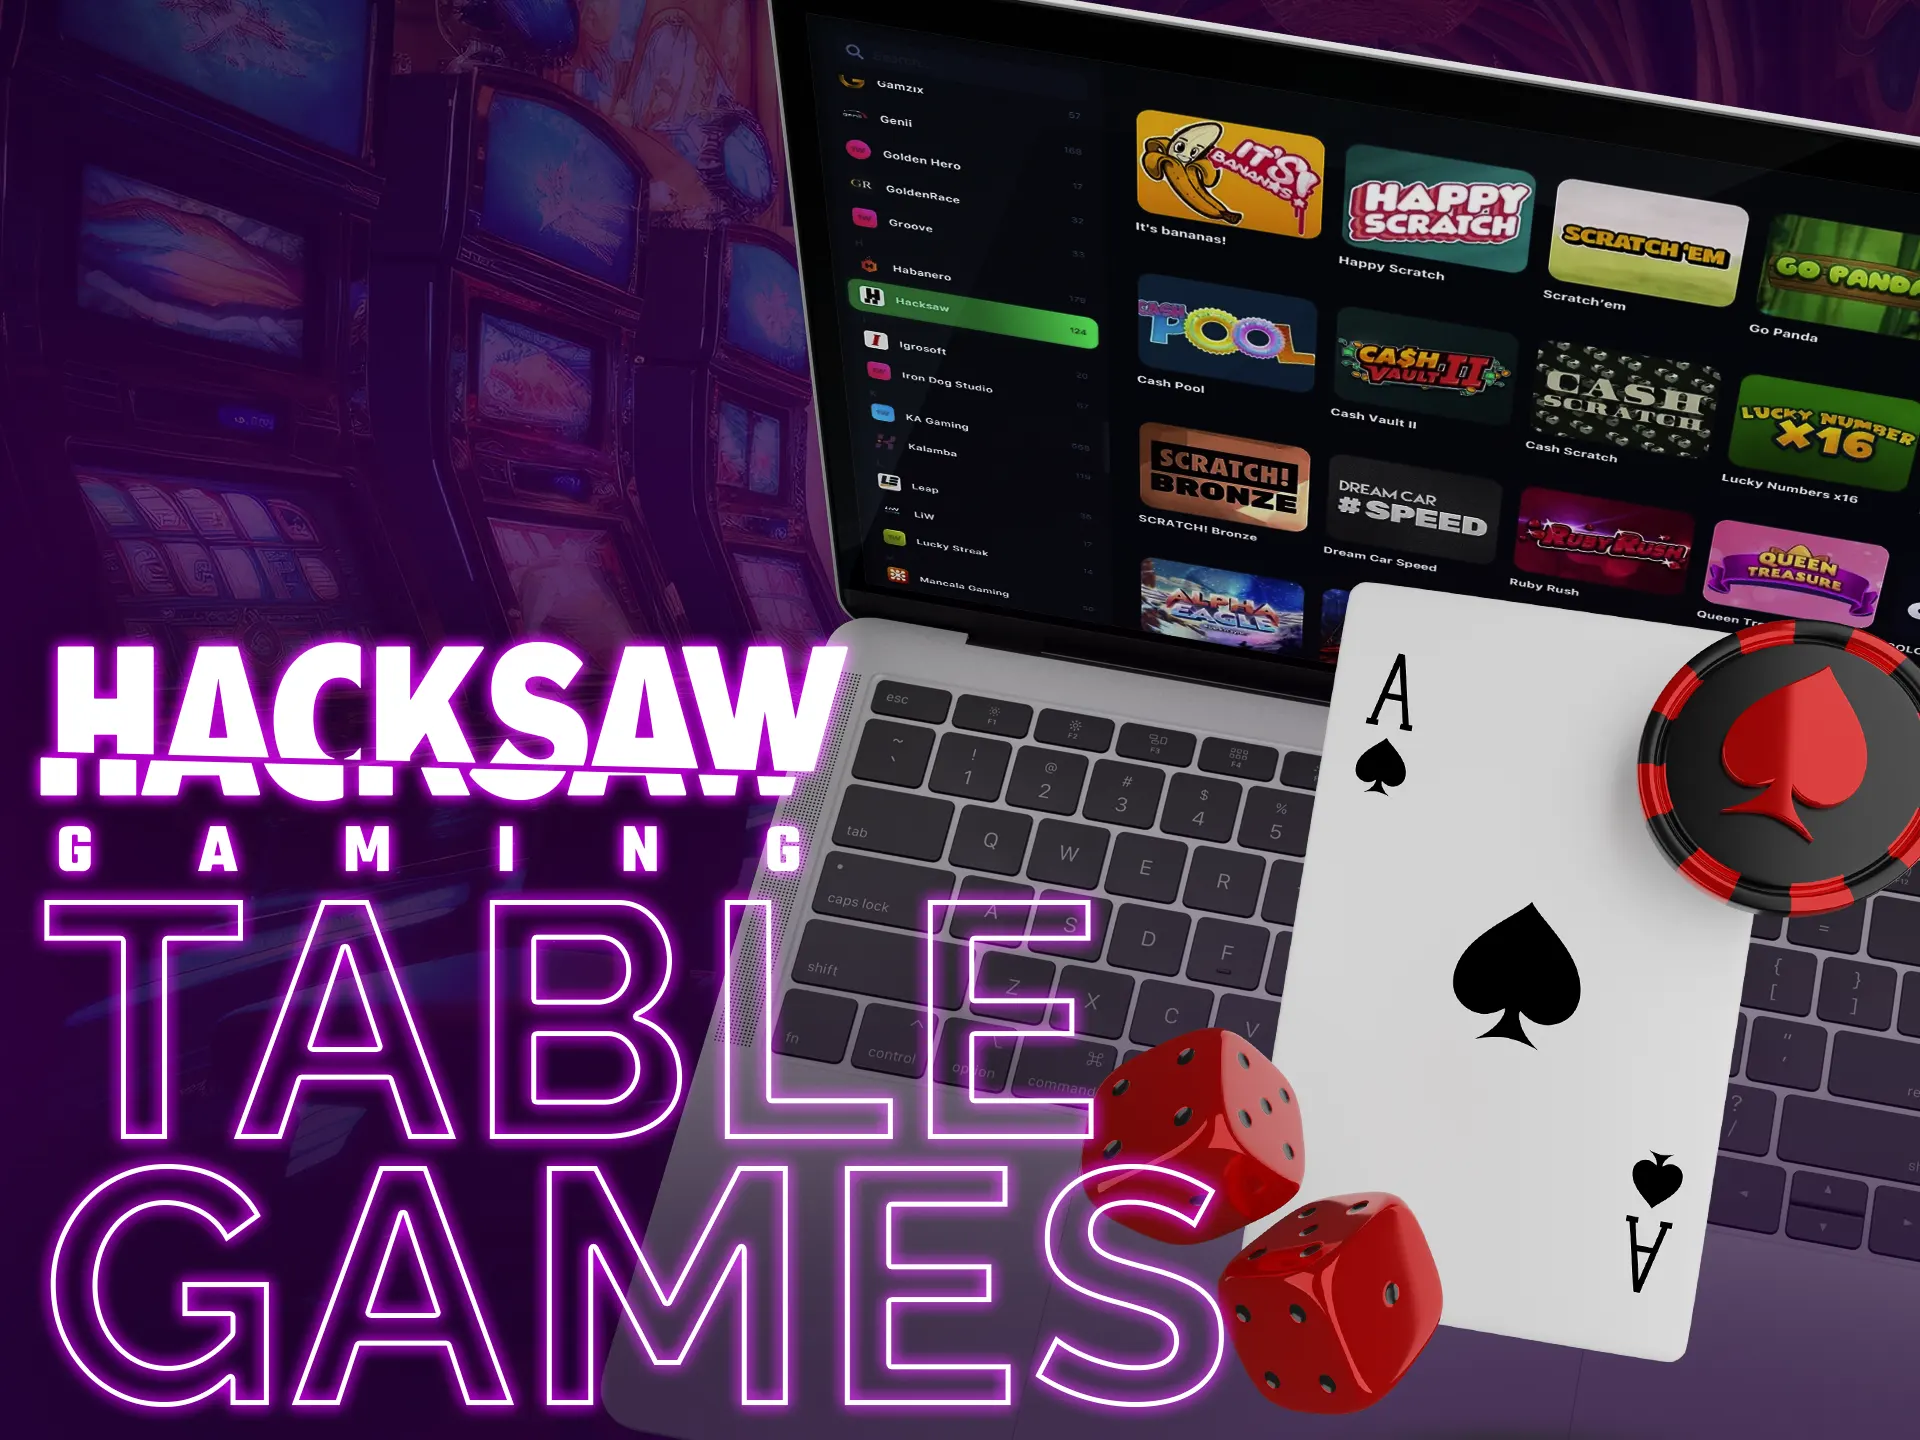 Hacksaw Gaming focuses on slots, not table games, but you can enjoy an instant games.